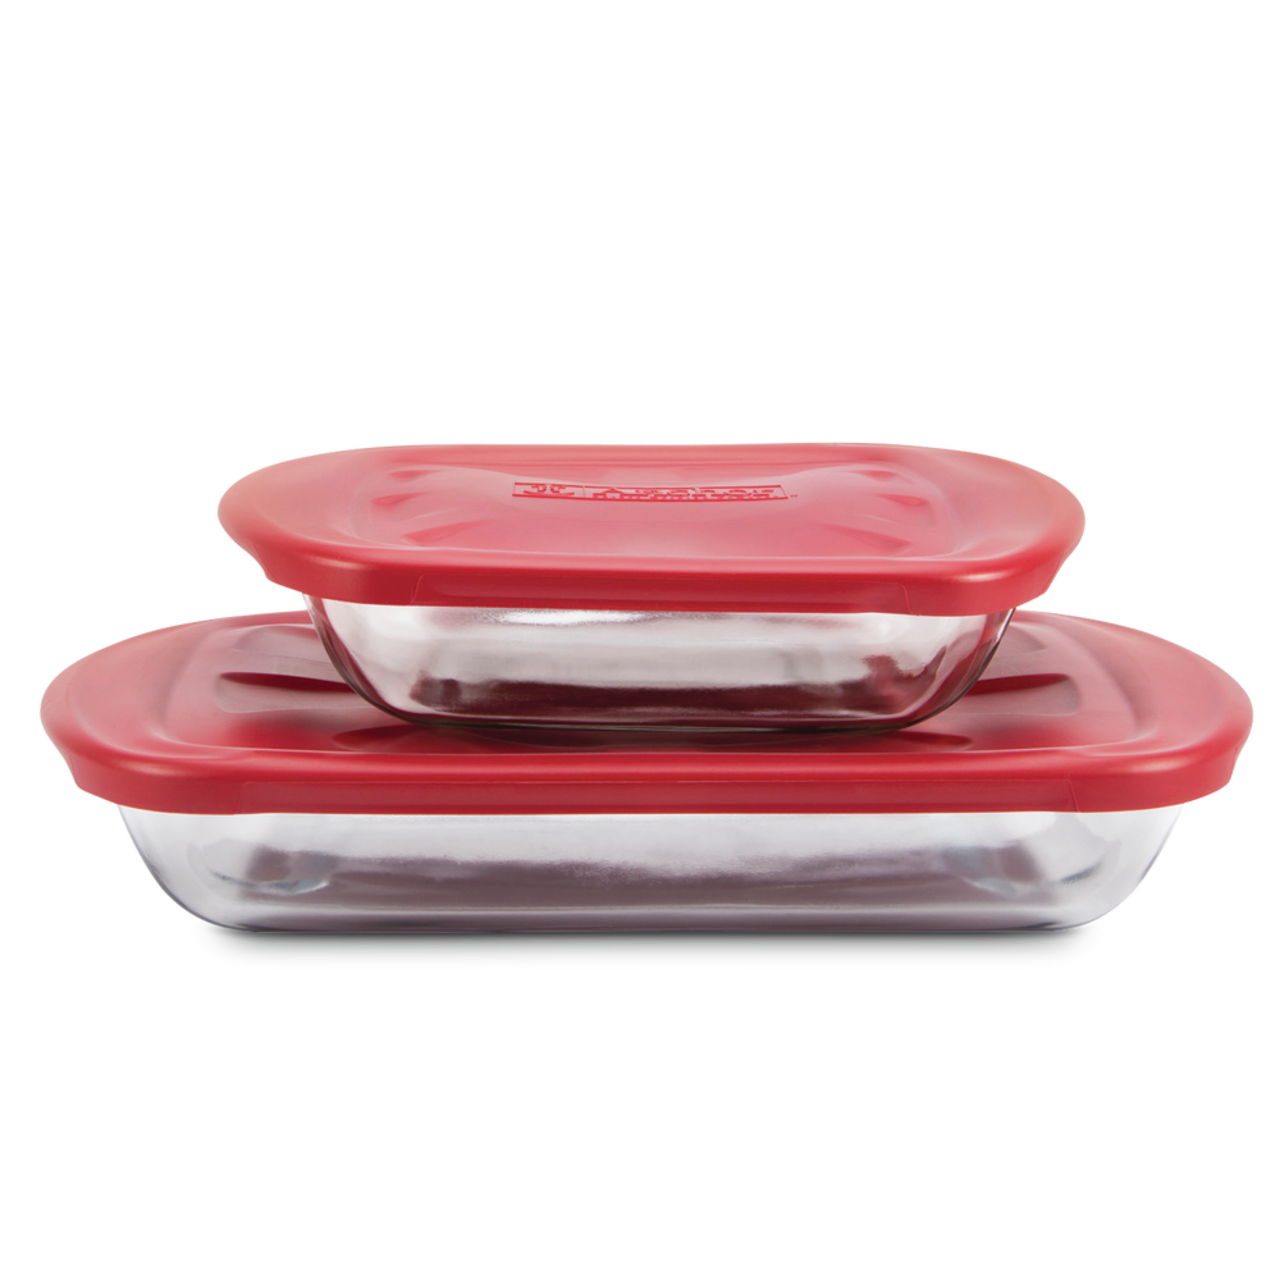 Anchor Hocking TrueFit Cake Dish with Cherry Lid, 8 inch, Clear